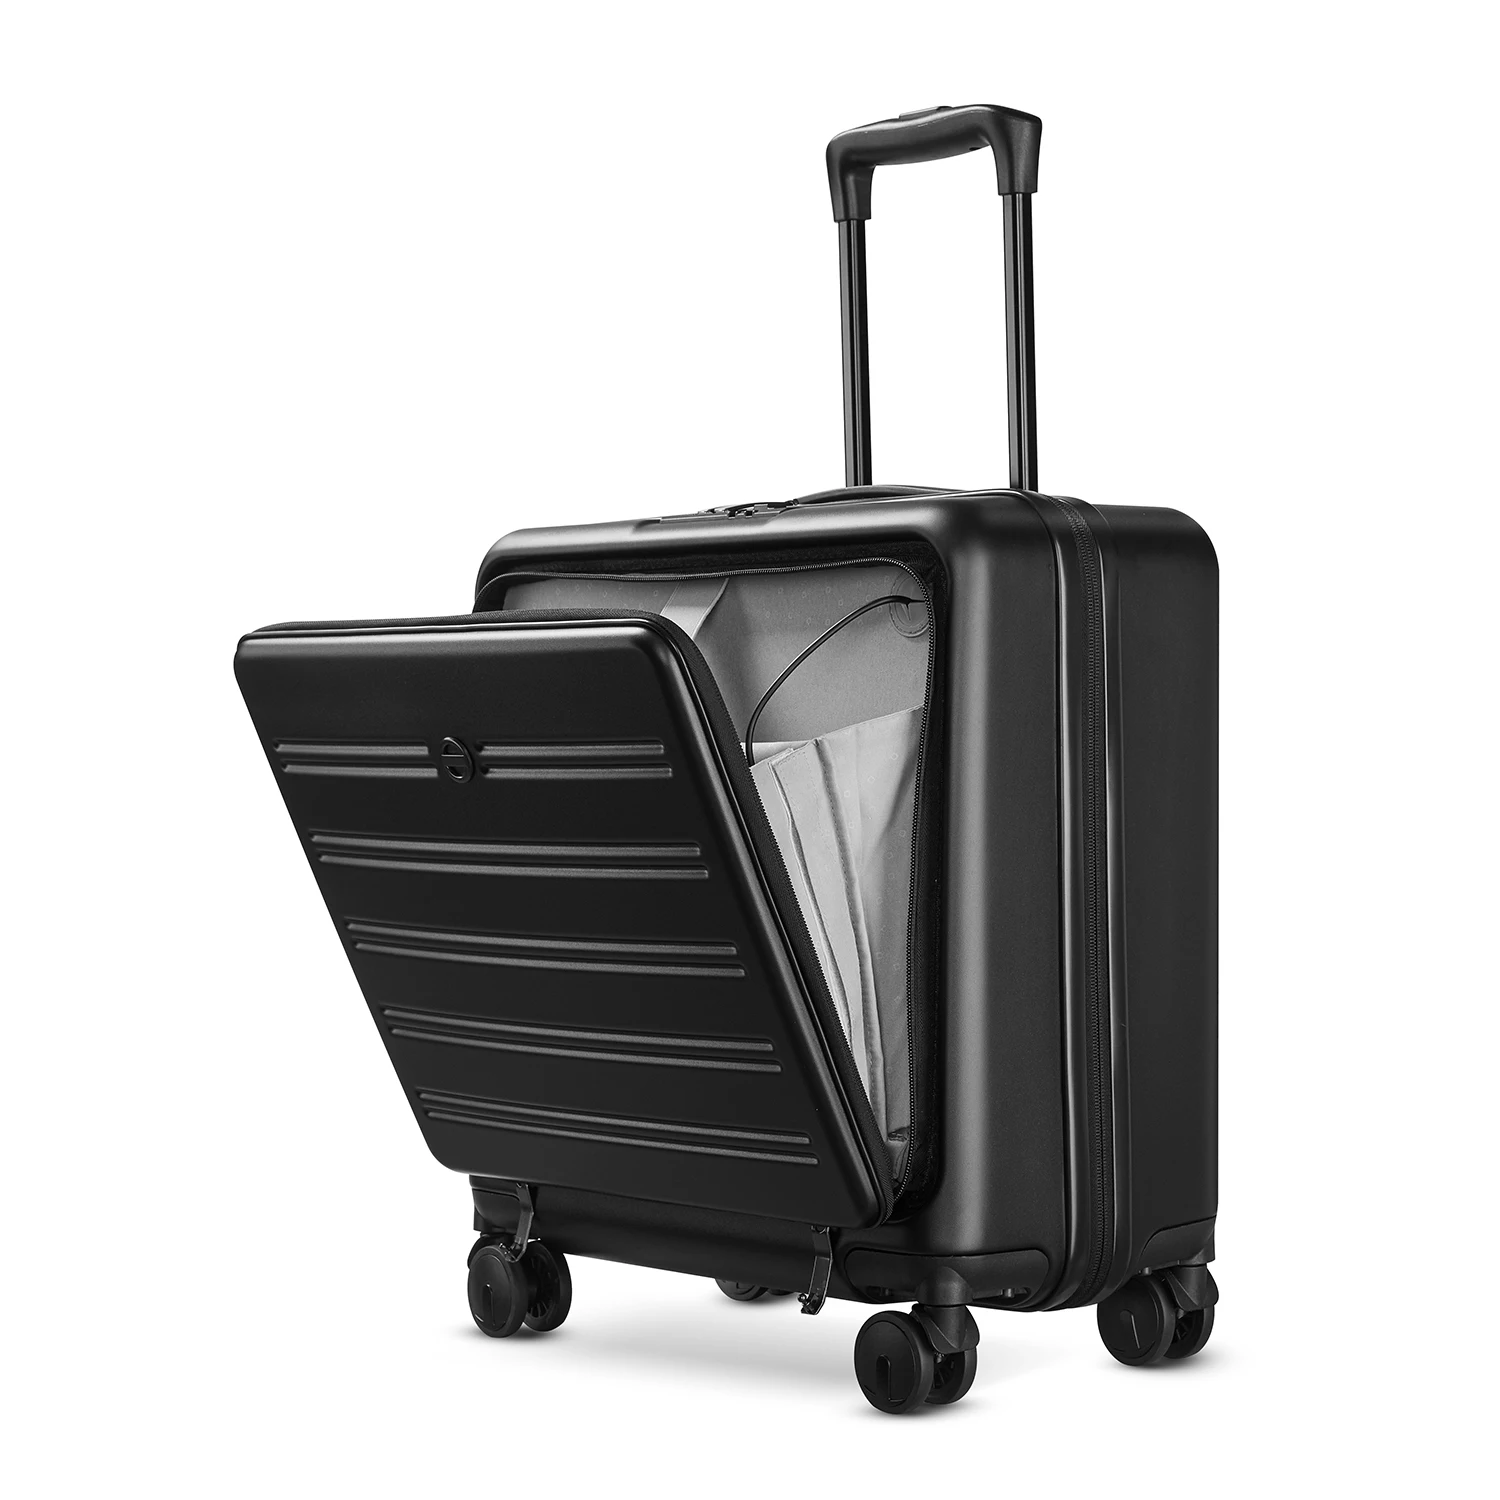 

18 inch PC Carry On Cabin Bags Suitcase Travel Luggage Holiday Trolley Case with USB Interface Laptop Pocket